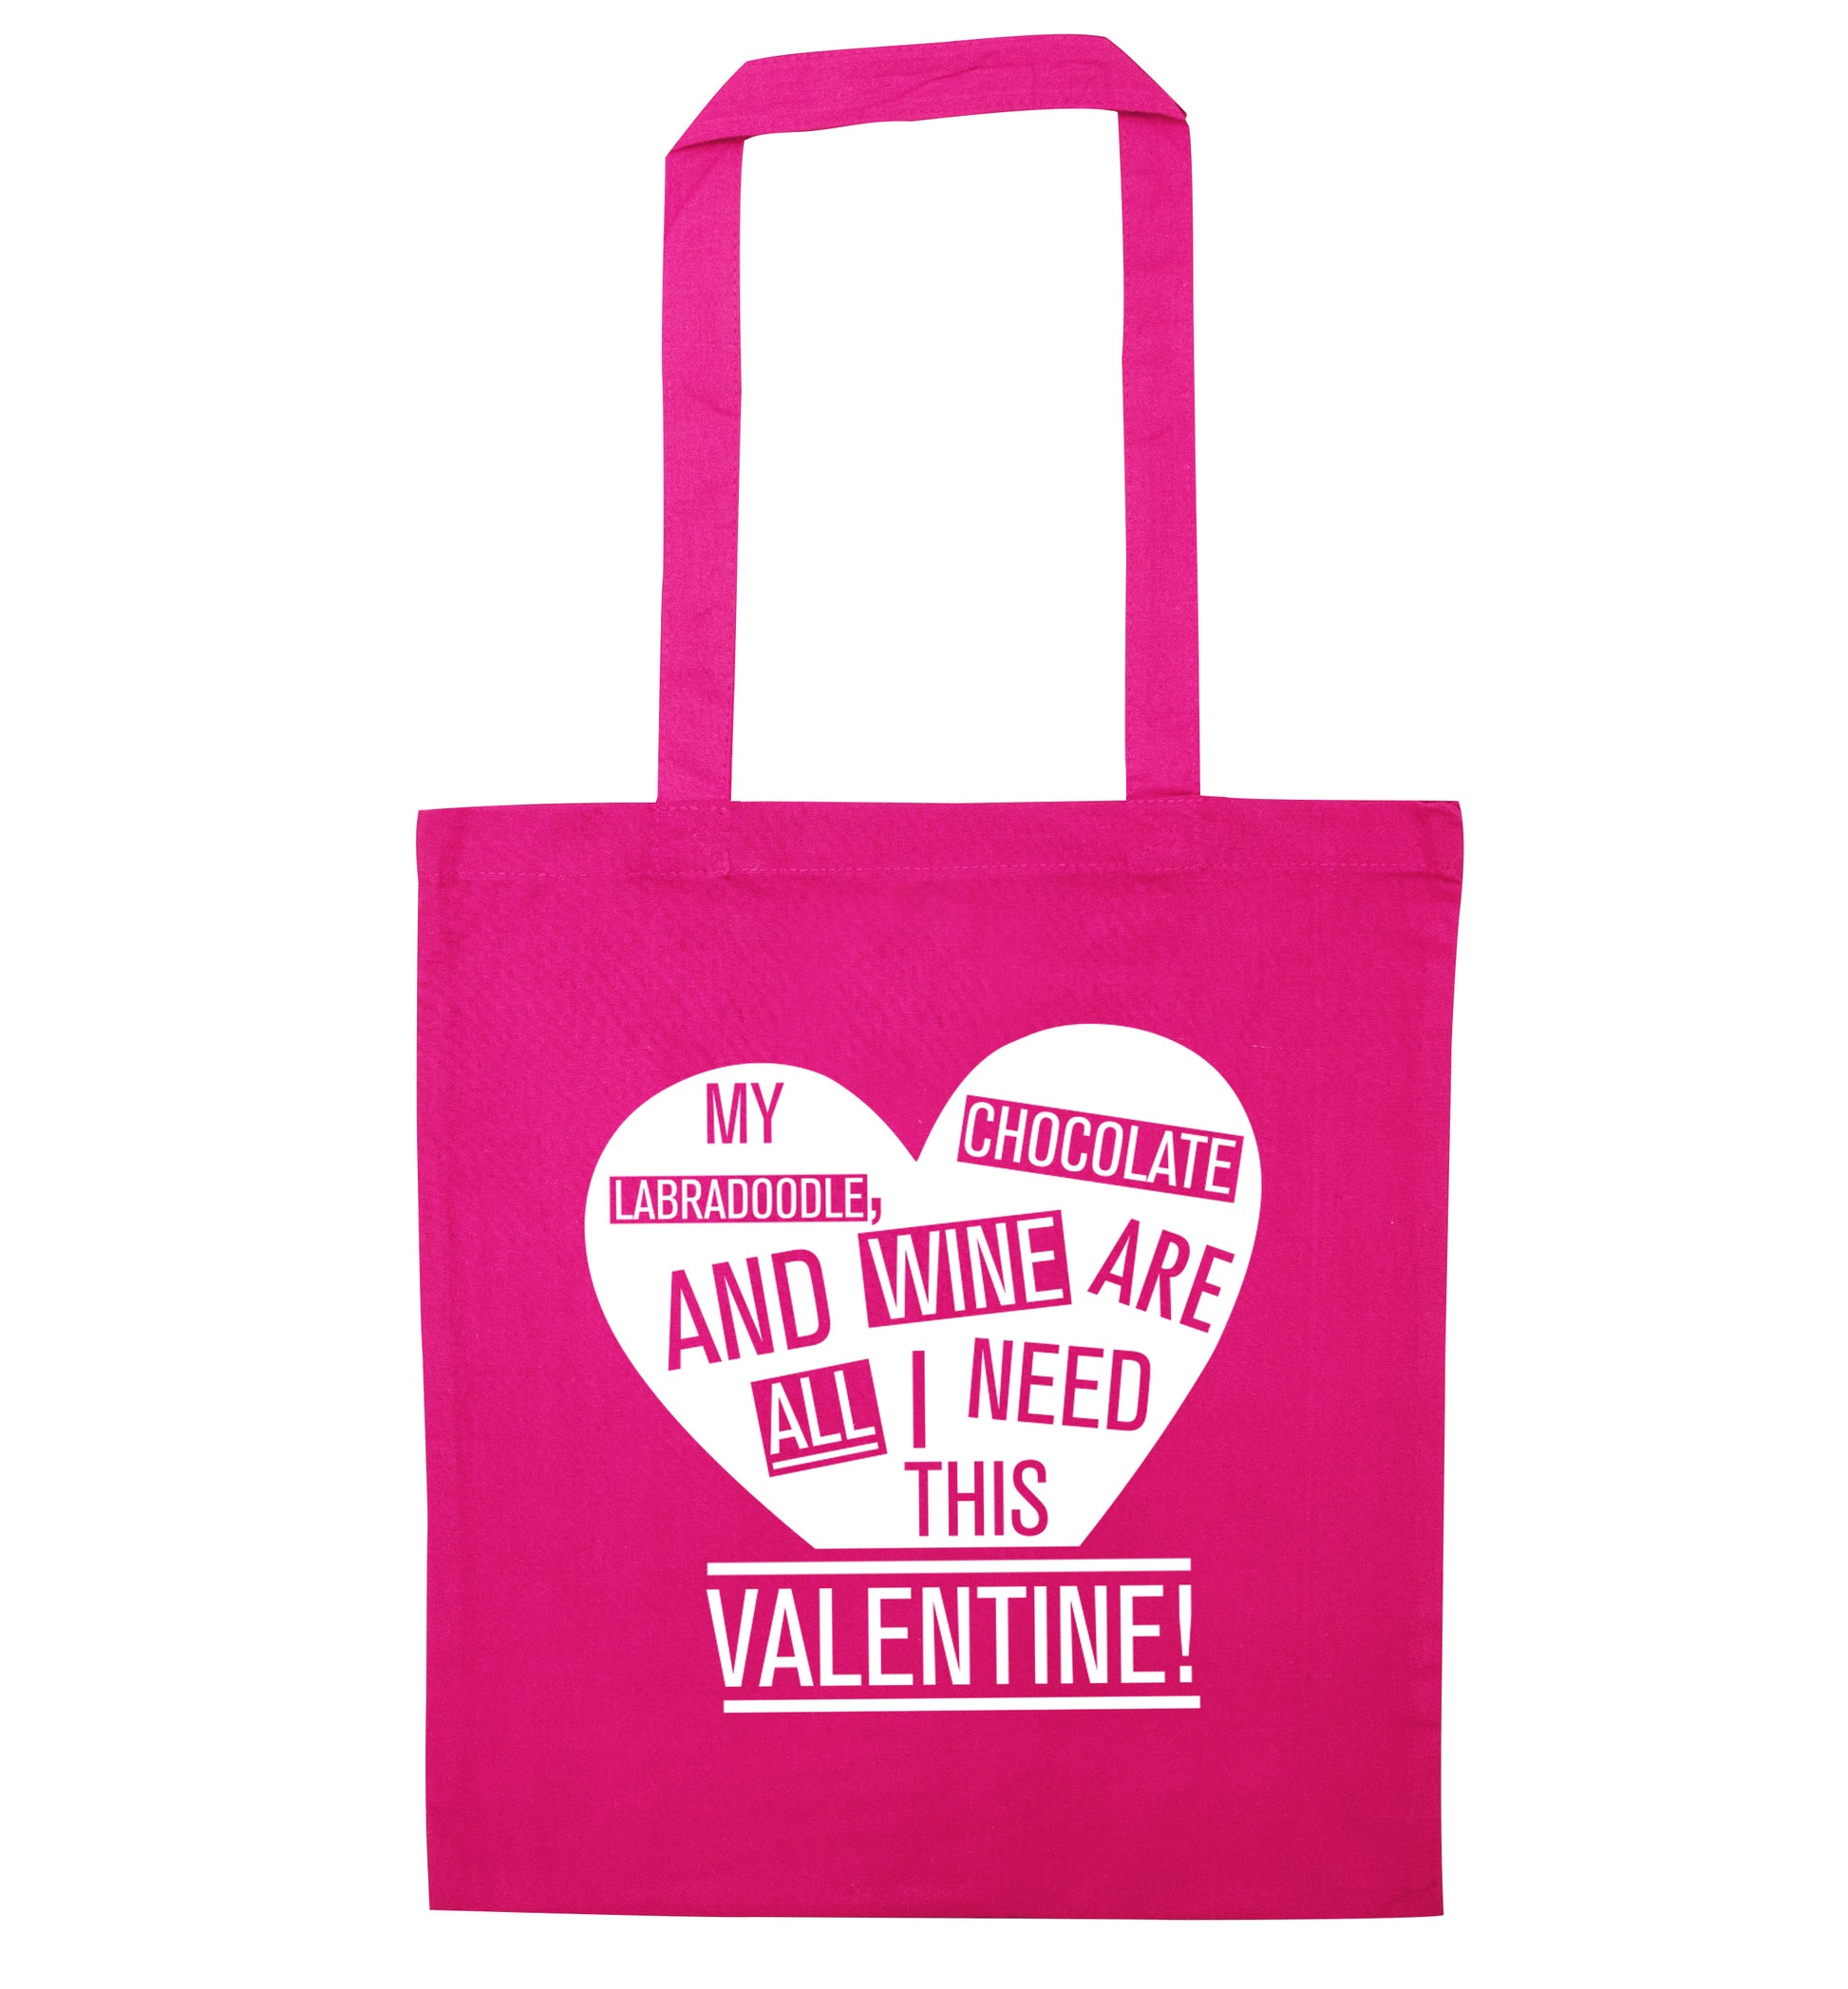 My labradoodle, chocolate and wine are all I need this valentine! pink tote bag